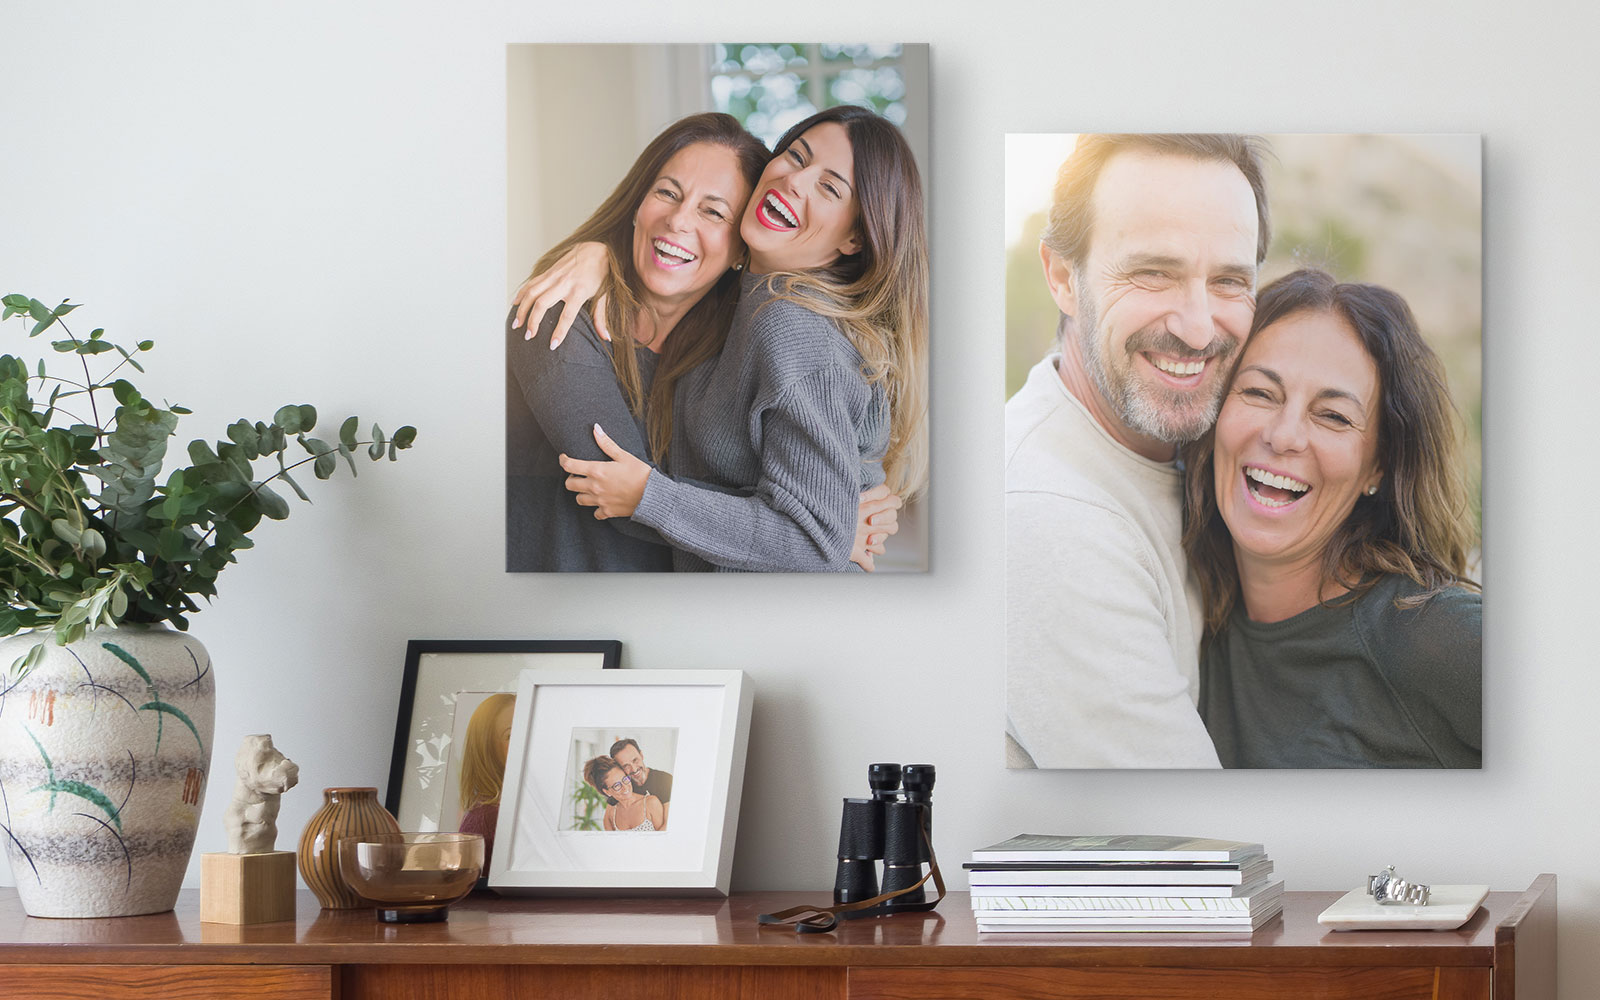 16x20 and 18x24 inch canvases showcase photos of a happy family laughing together